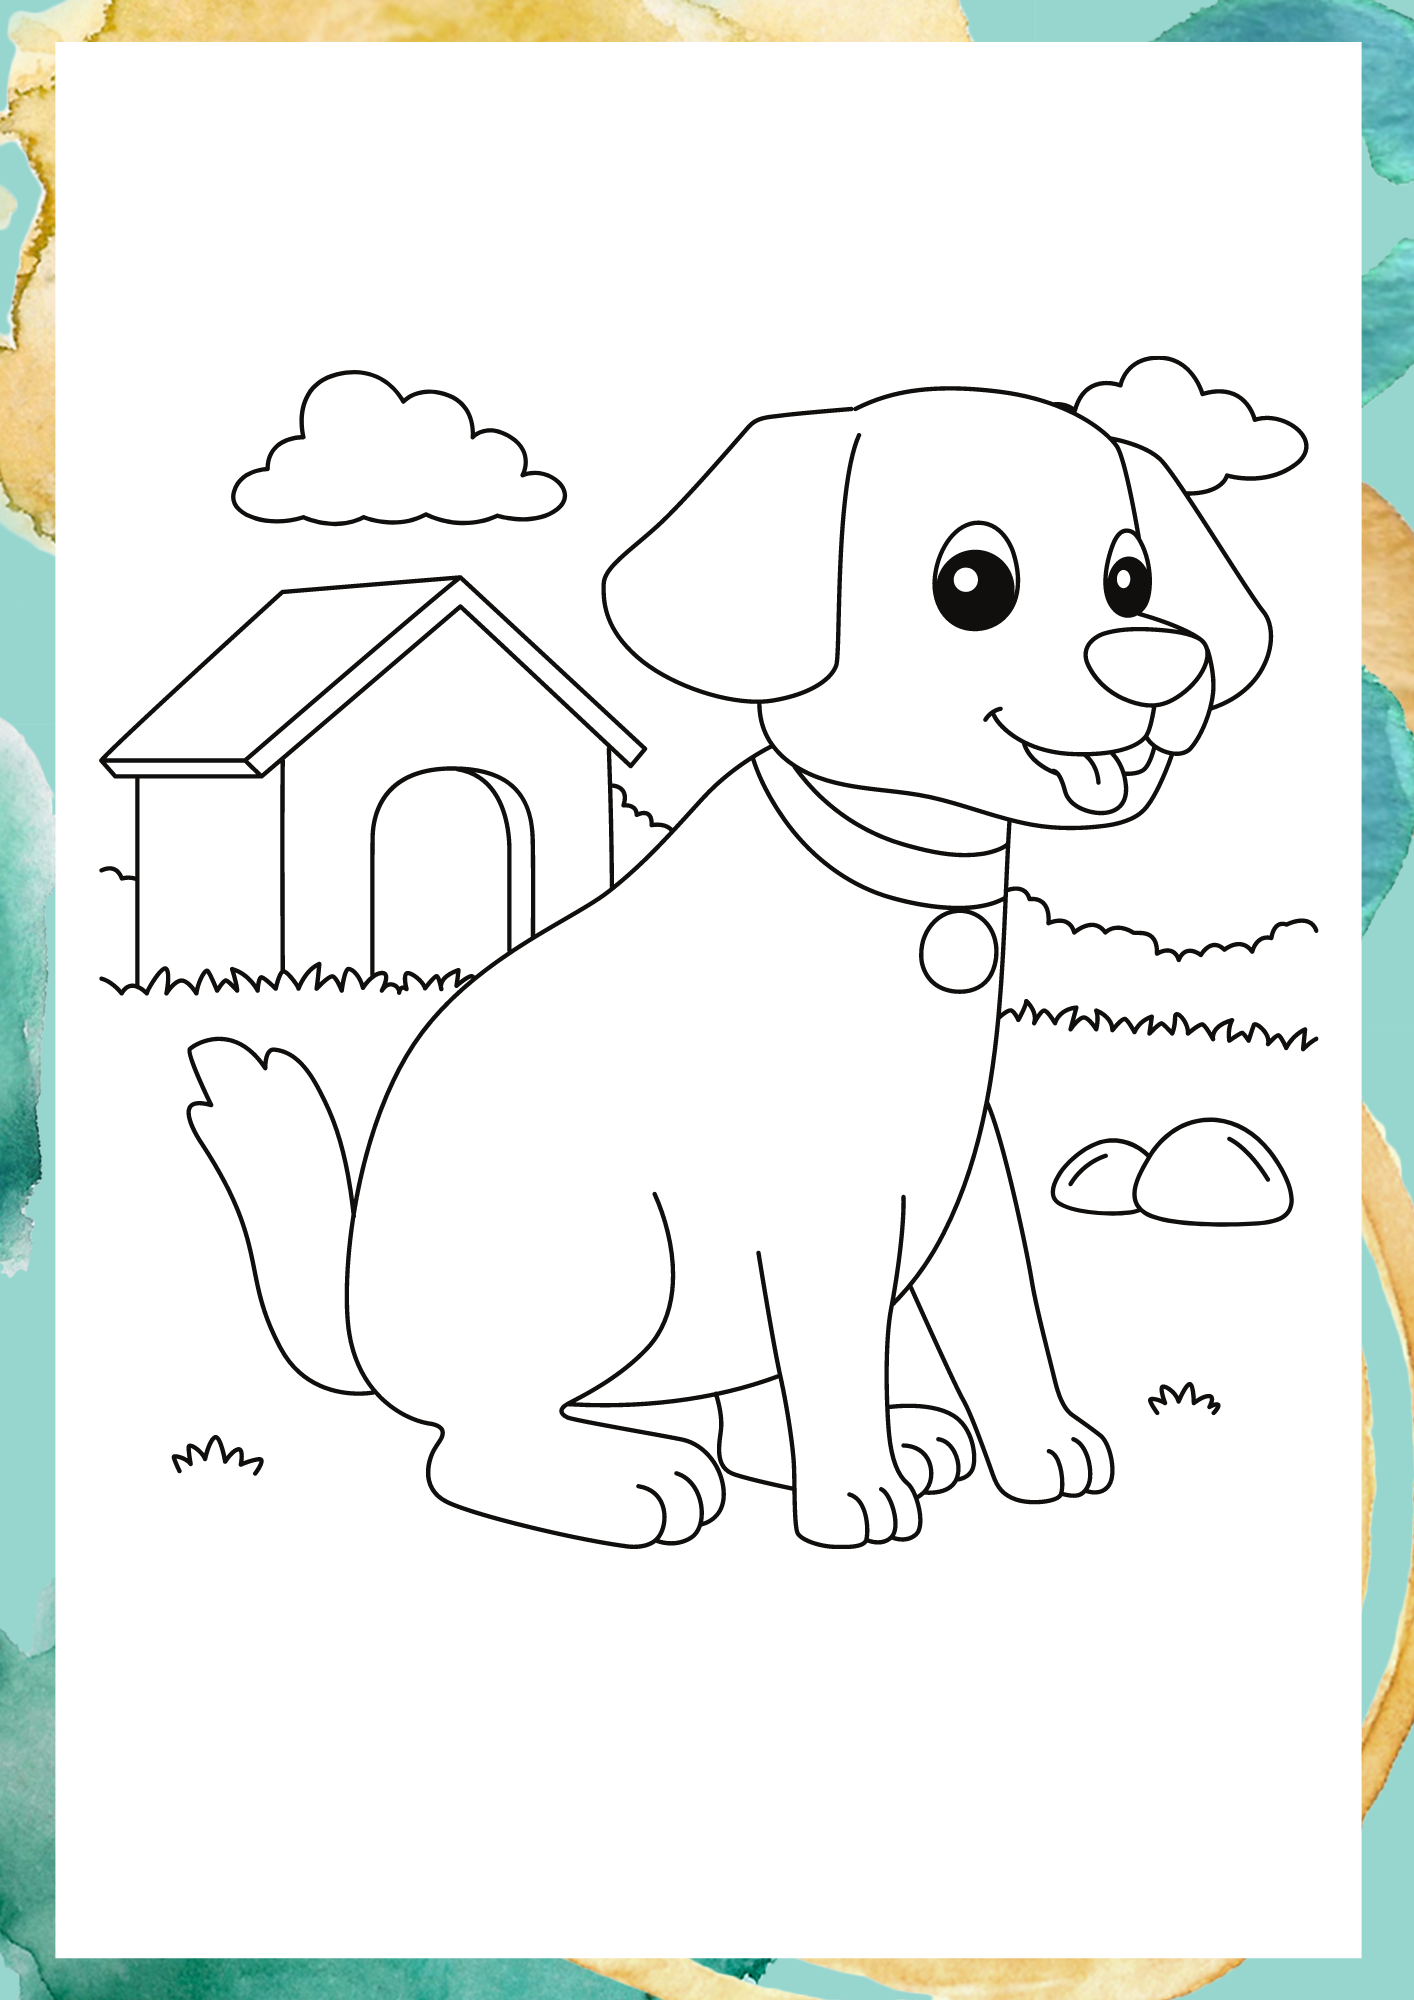 dog coloring page, animal coloring page, coloring page, coloring page for toddlers,Coloring Page, coloring sheet, happy color, colouring, free coloring pages, coloring pages for kids, printable coloring pages, cute coloring pages, colouring pages, colouring to print, free printable coloring pages, free coloring pages for kids, easy coloring pages, coloring sheets